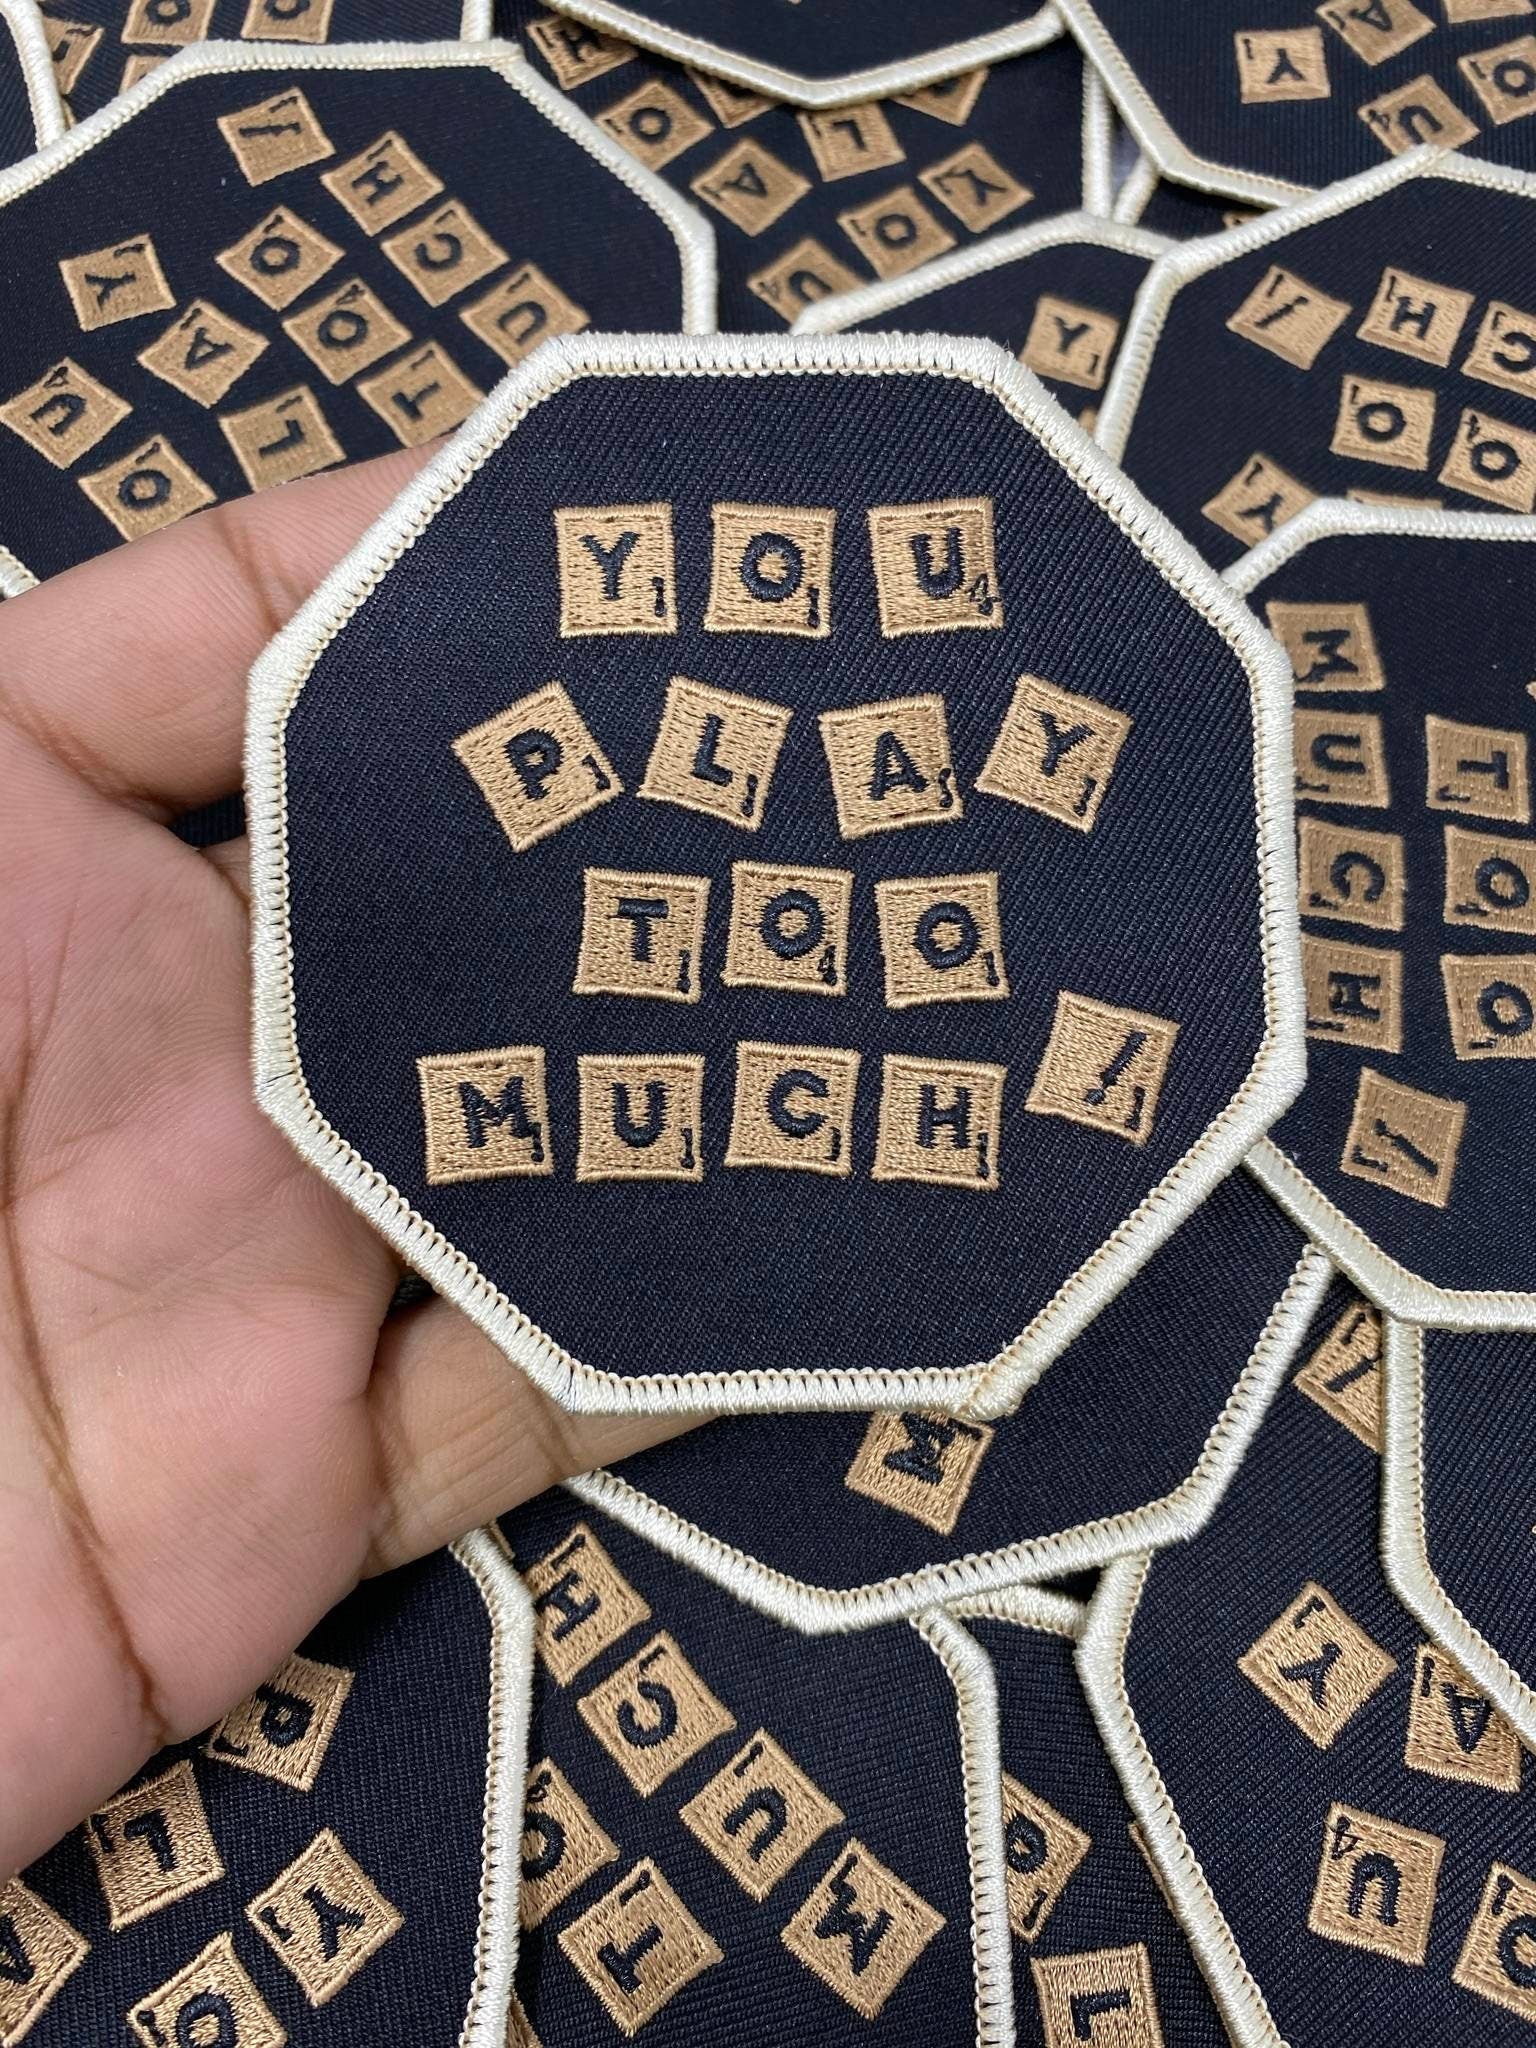 New Arrival, "You Play too Much!" Scrabble Word Game, Statement Patch, Iron-on Embroidered Patch Badge, Cool Patches, DIY, Jacket Patch, 3"